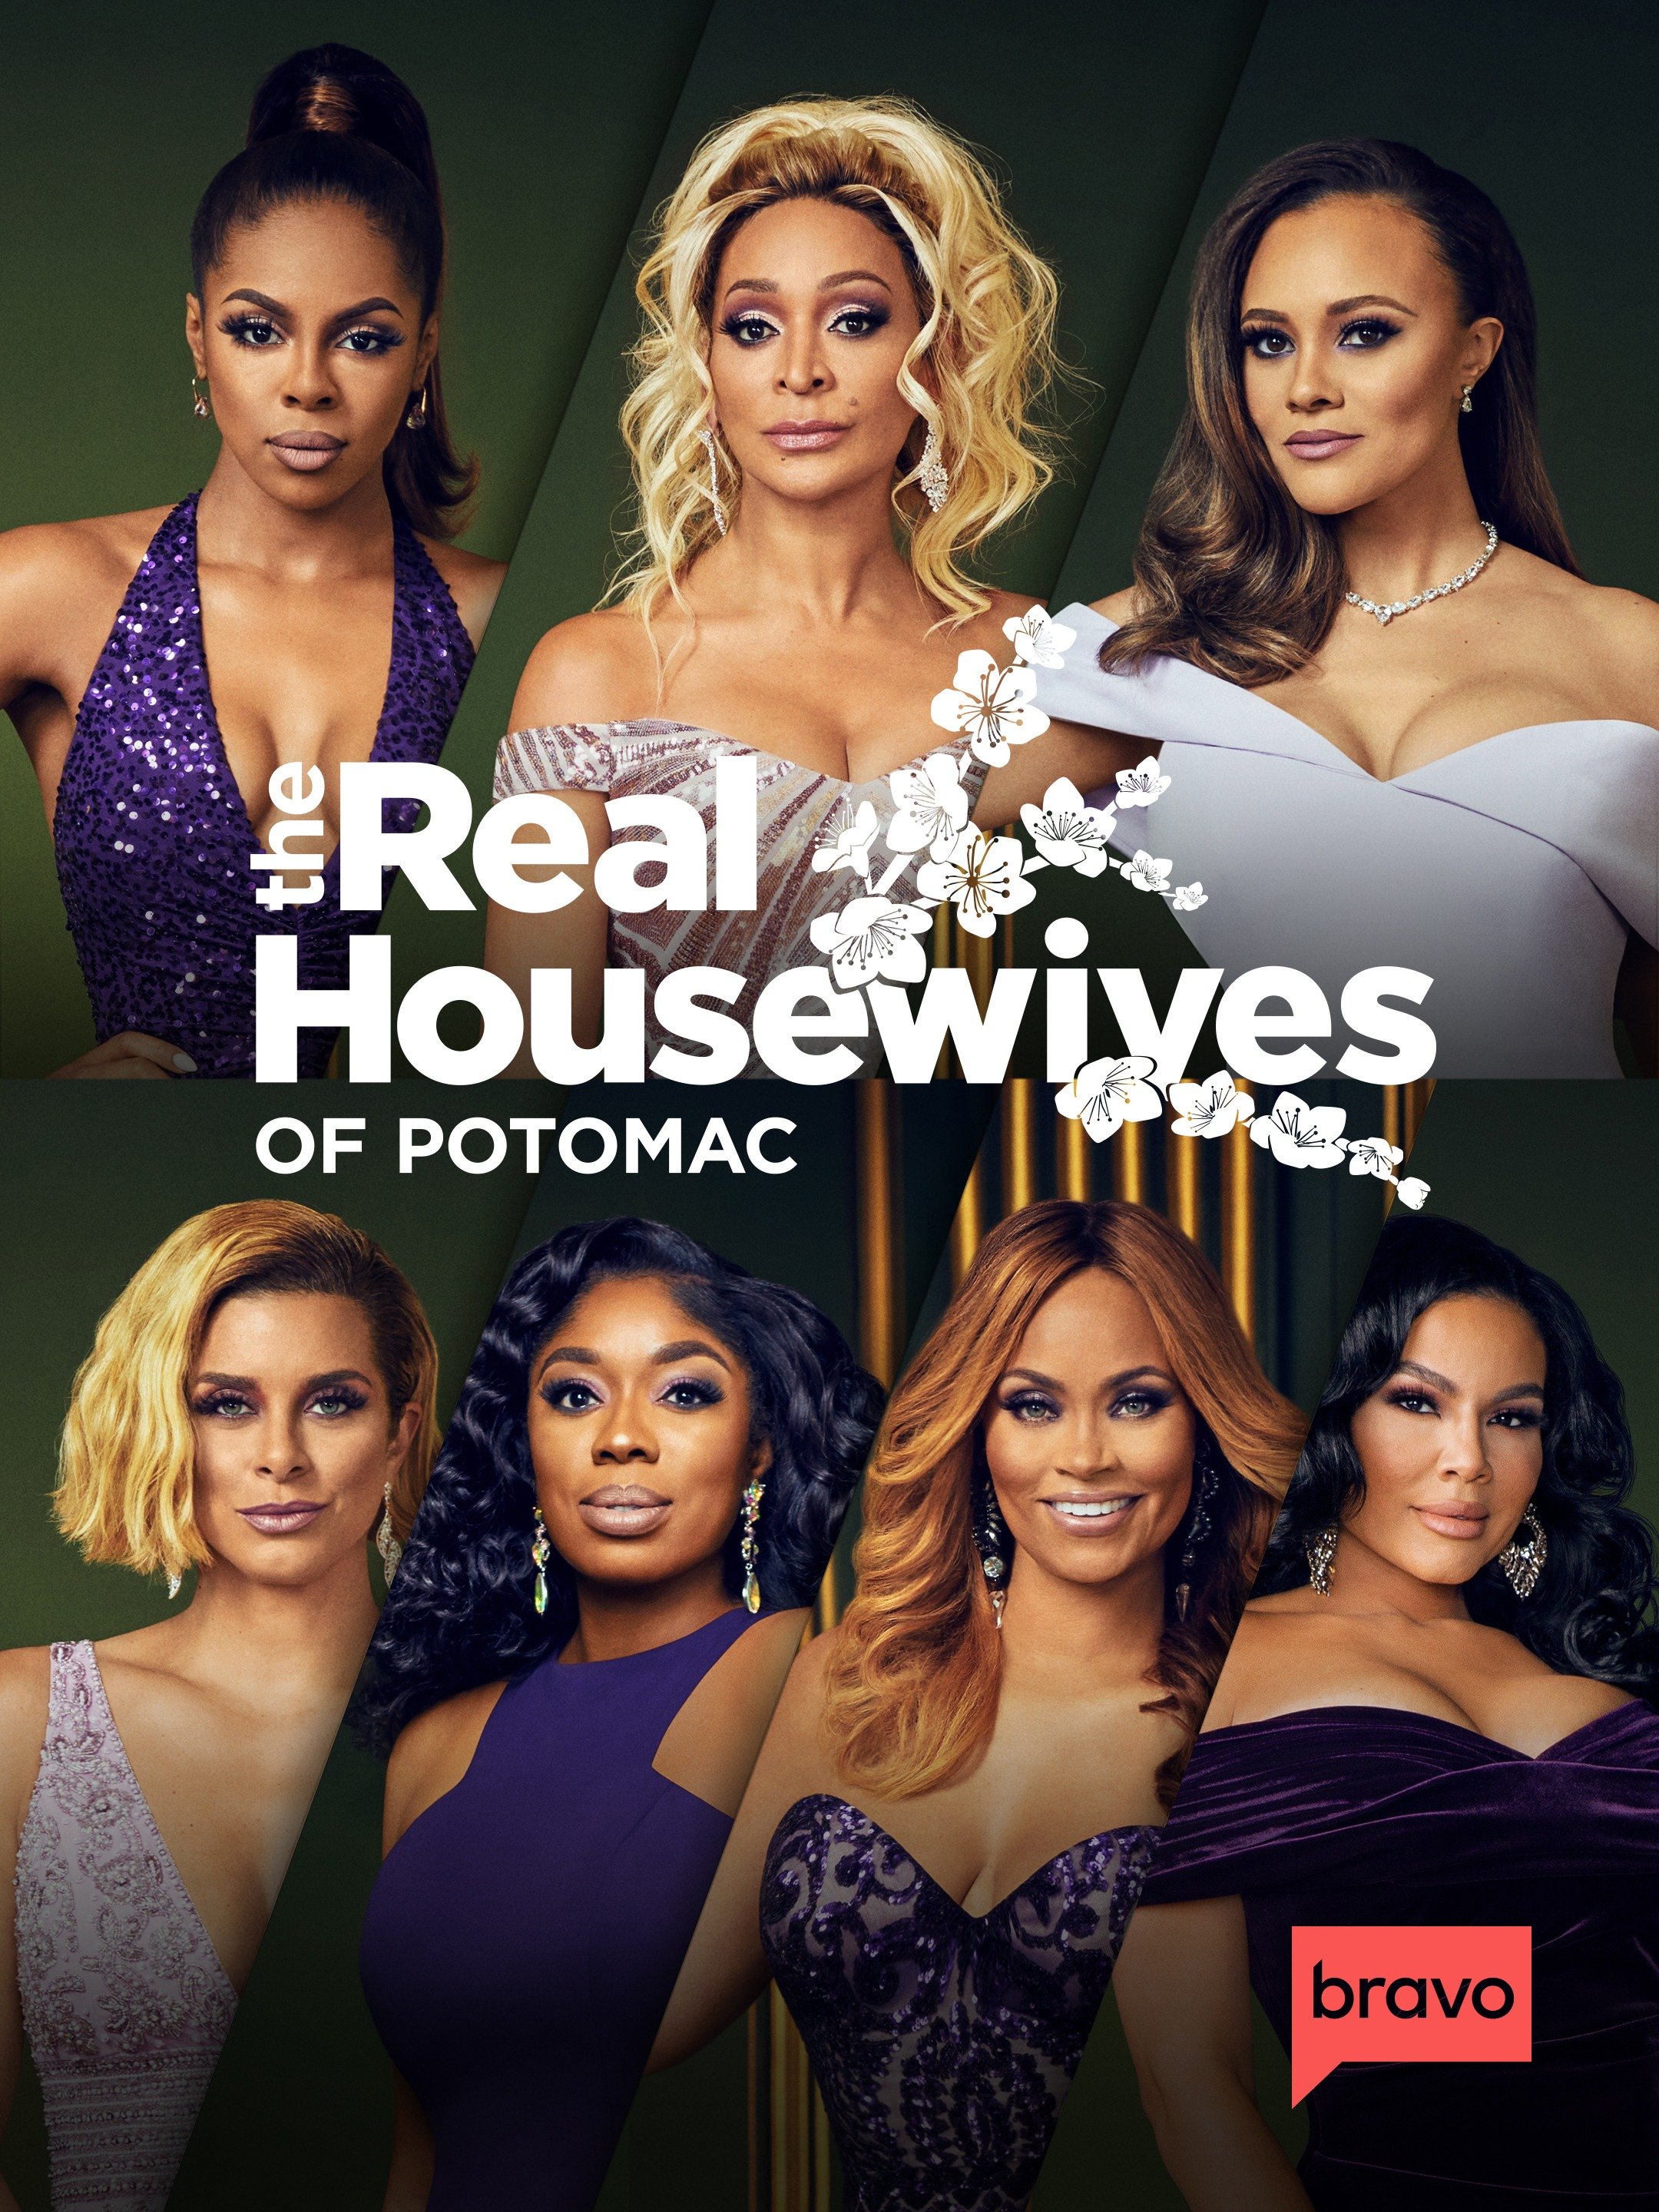 The Real Housewives of Potomac picture